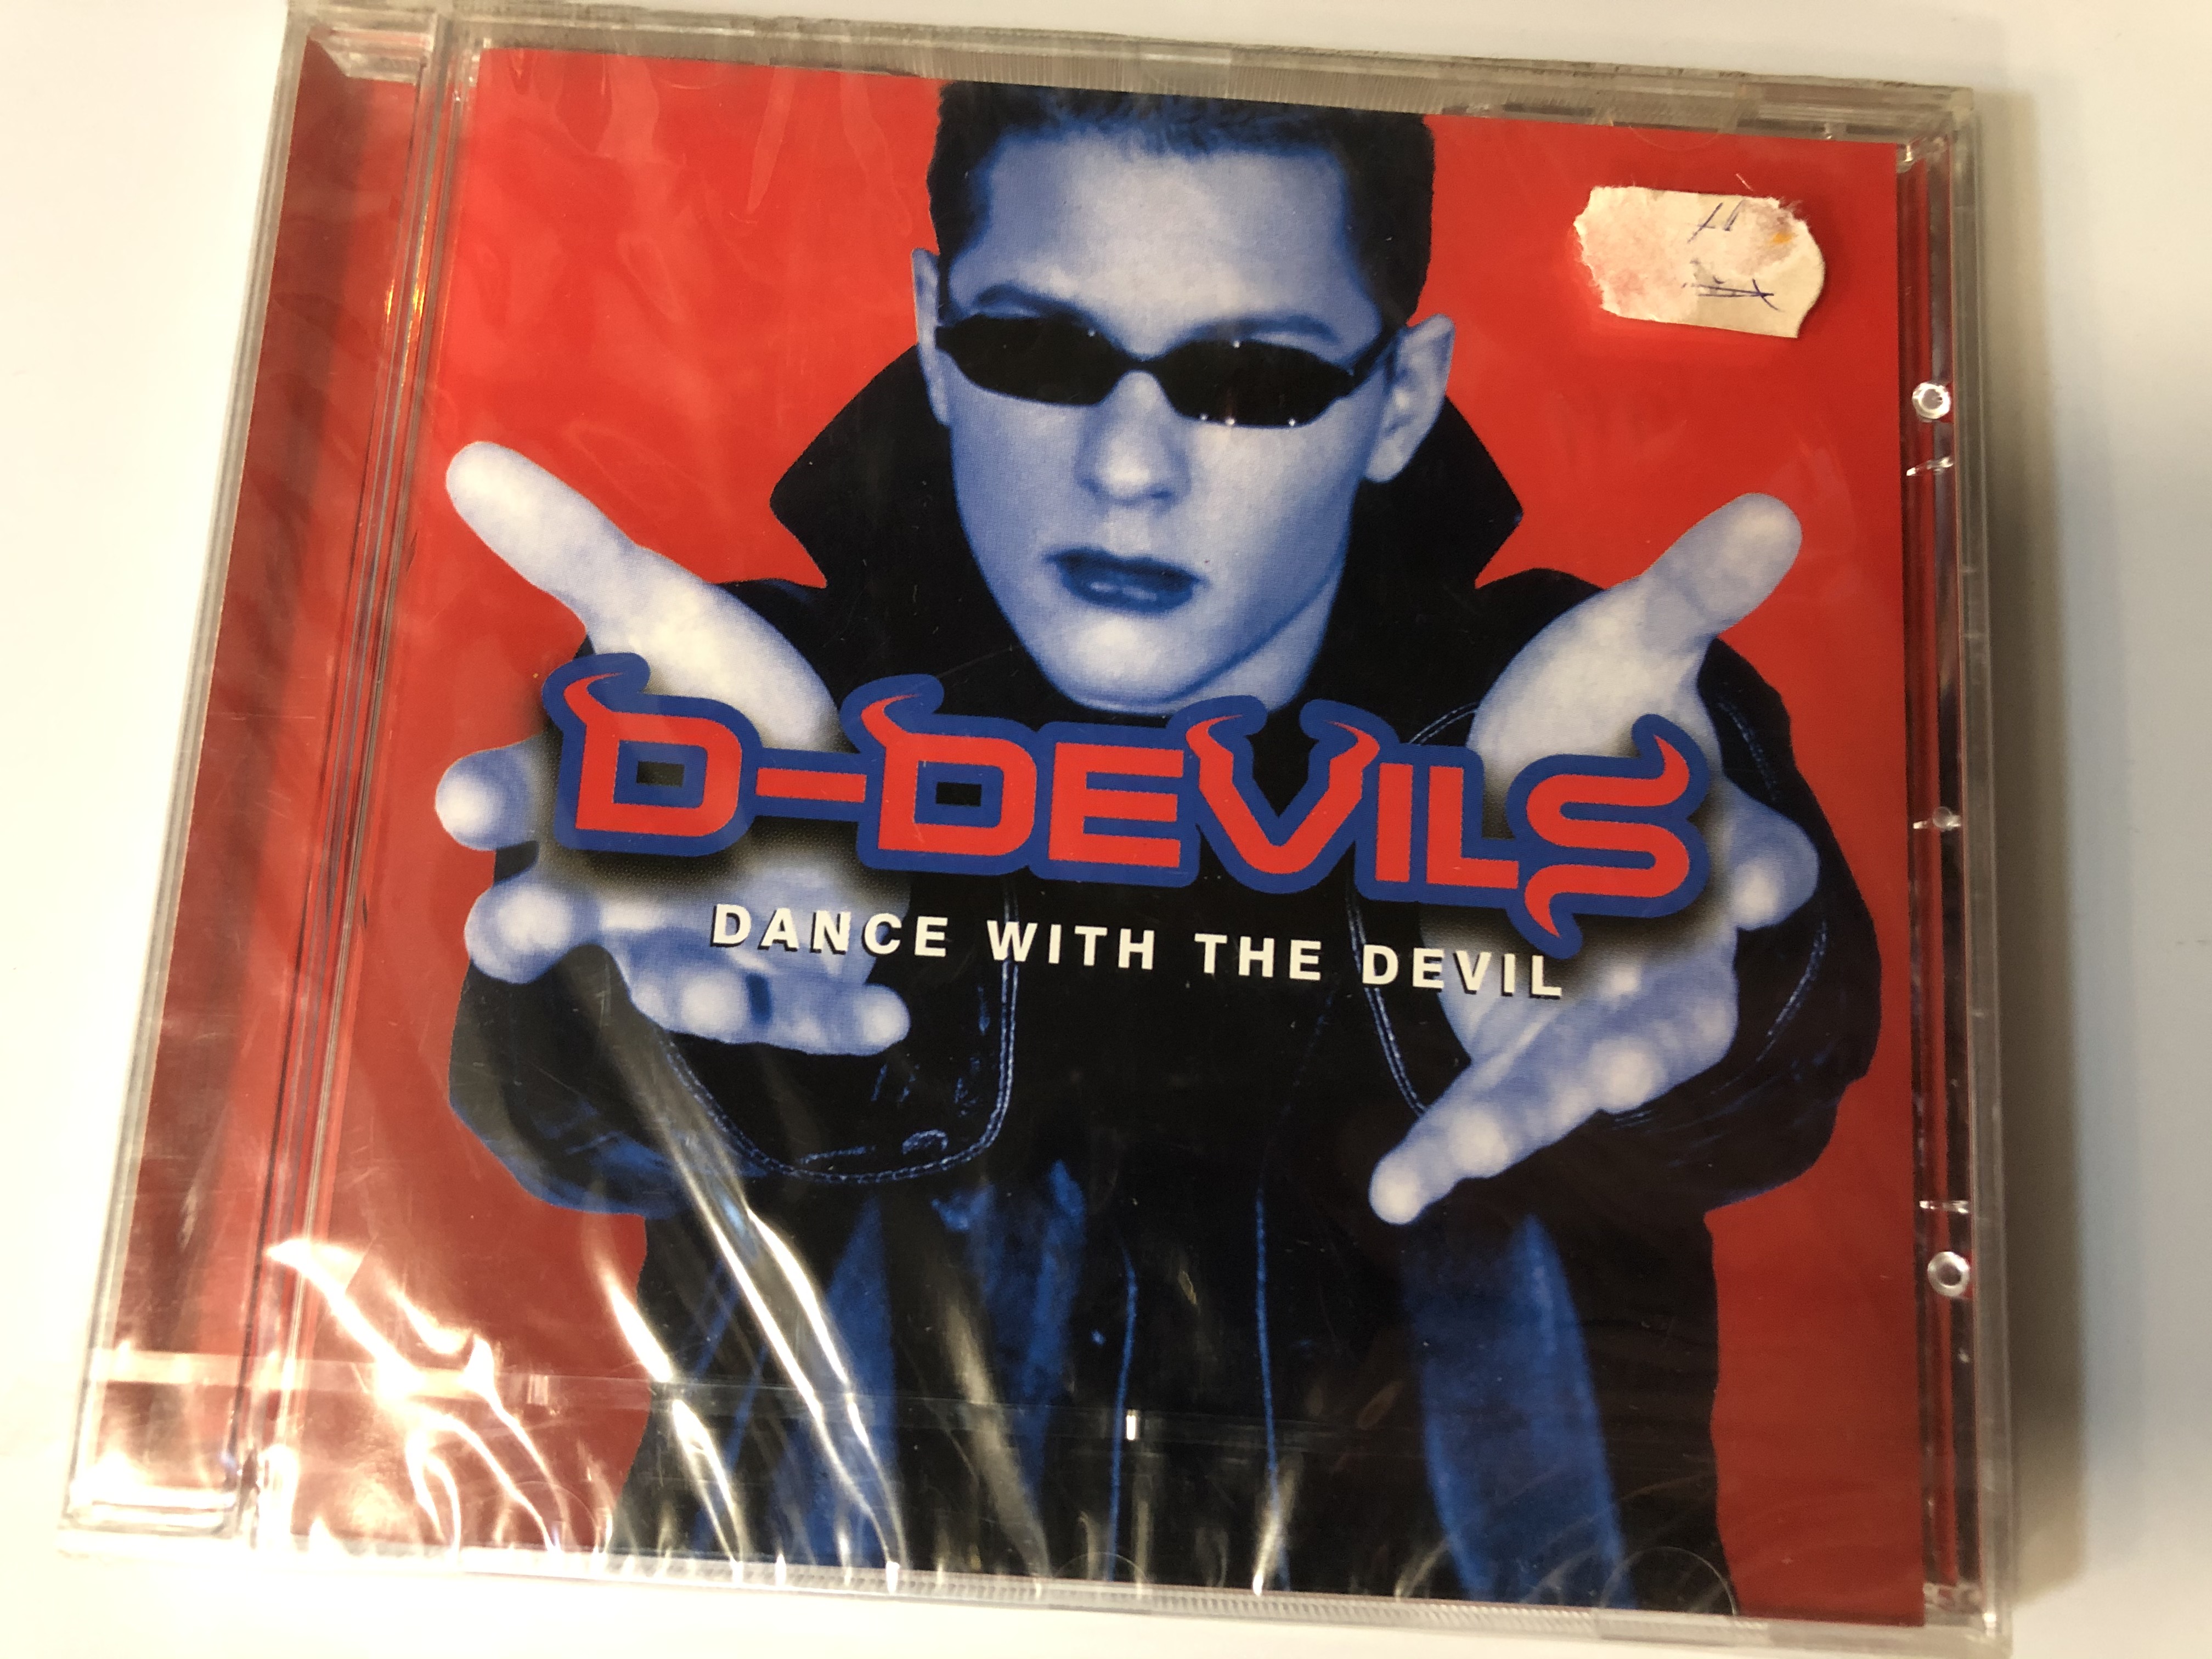 d-devils-dance-with-the-devil-record-express-audio-cd-2001-943-1-.jpg